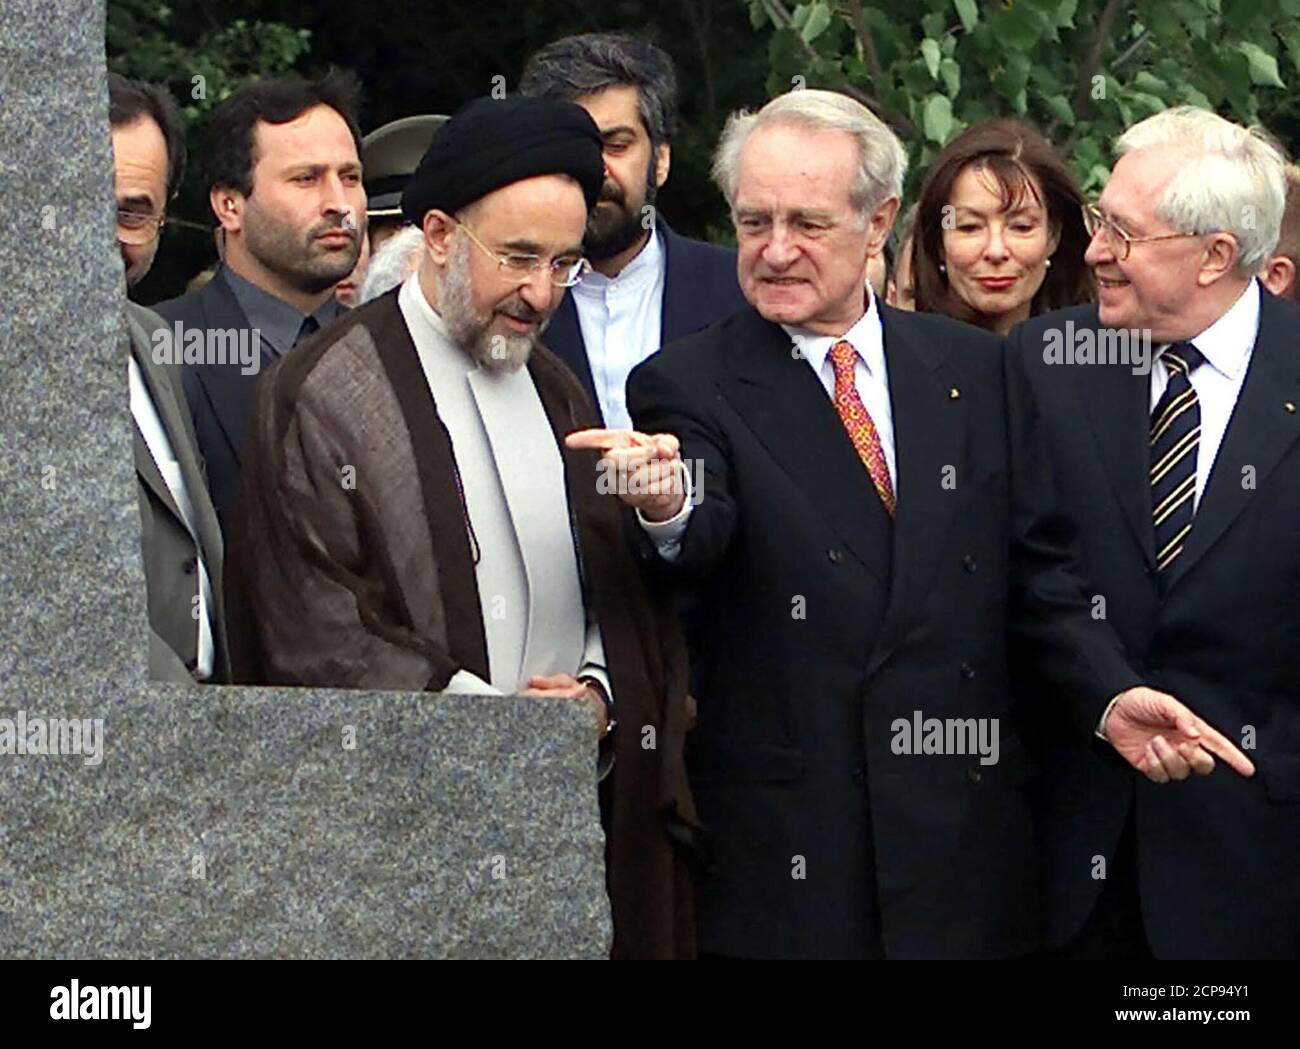 Iran's reformist President Mohammad Khatami (2ndL) listens to German President Johannes Rau who makes a point when they visit a memorial for 14th century Persian poet Hafez and Germany's greatest writer Johann Wolfgang von Goethe in Weimar, July 12. Khatami continues his official three day visit to Germany.  KP Stock Photo